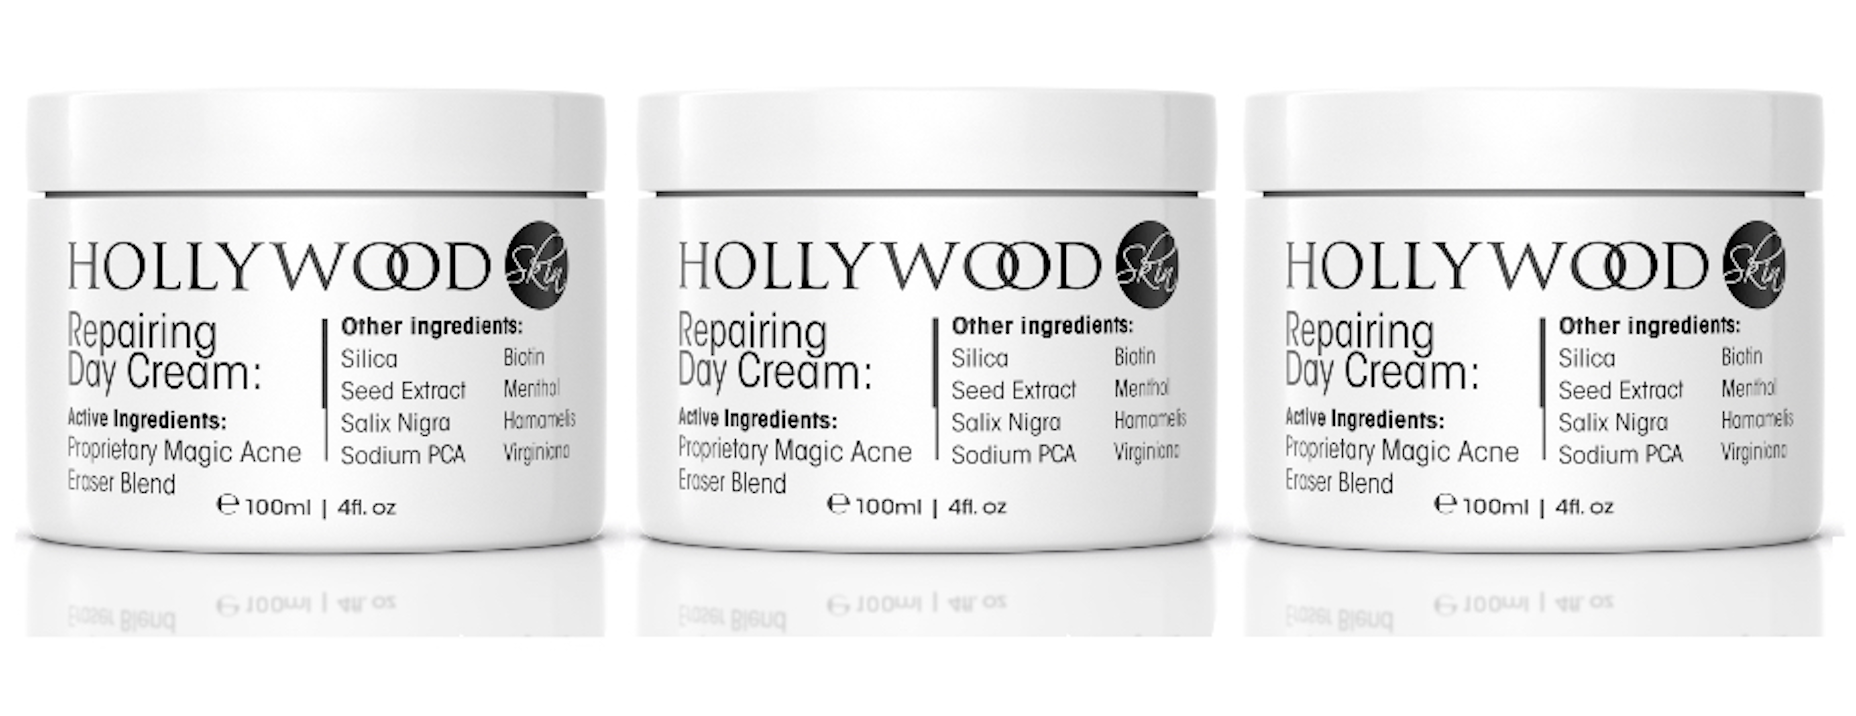 SPECIAL OFFER - Repairing Day Cream x 3 Bottles - Massive 40% Discount